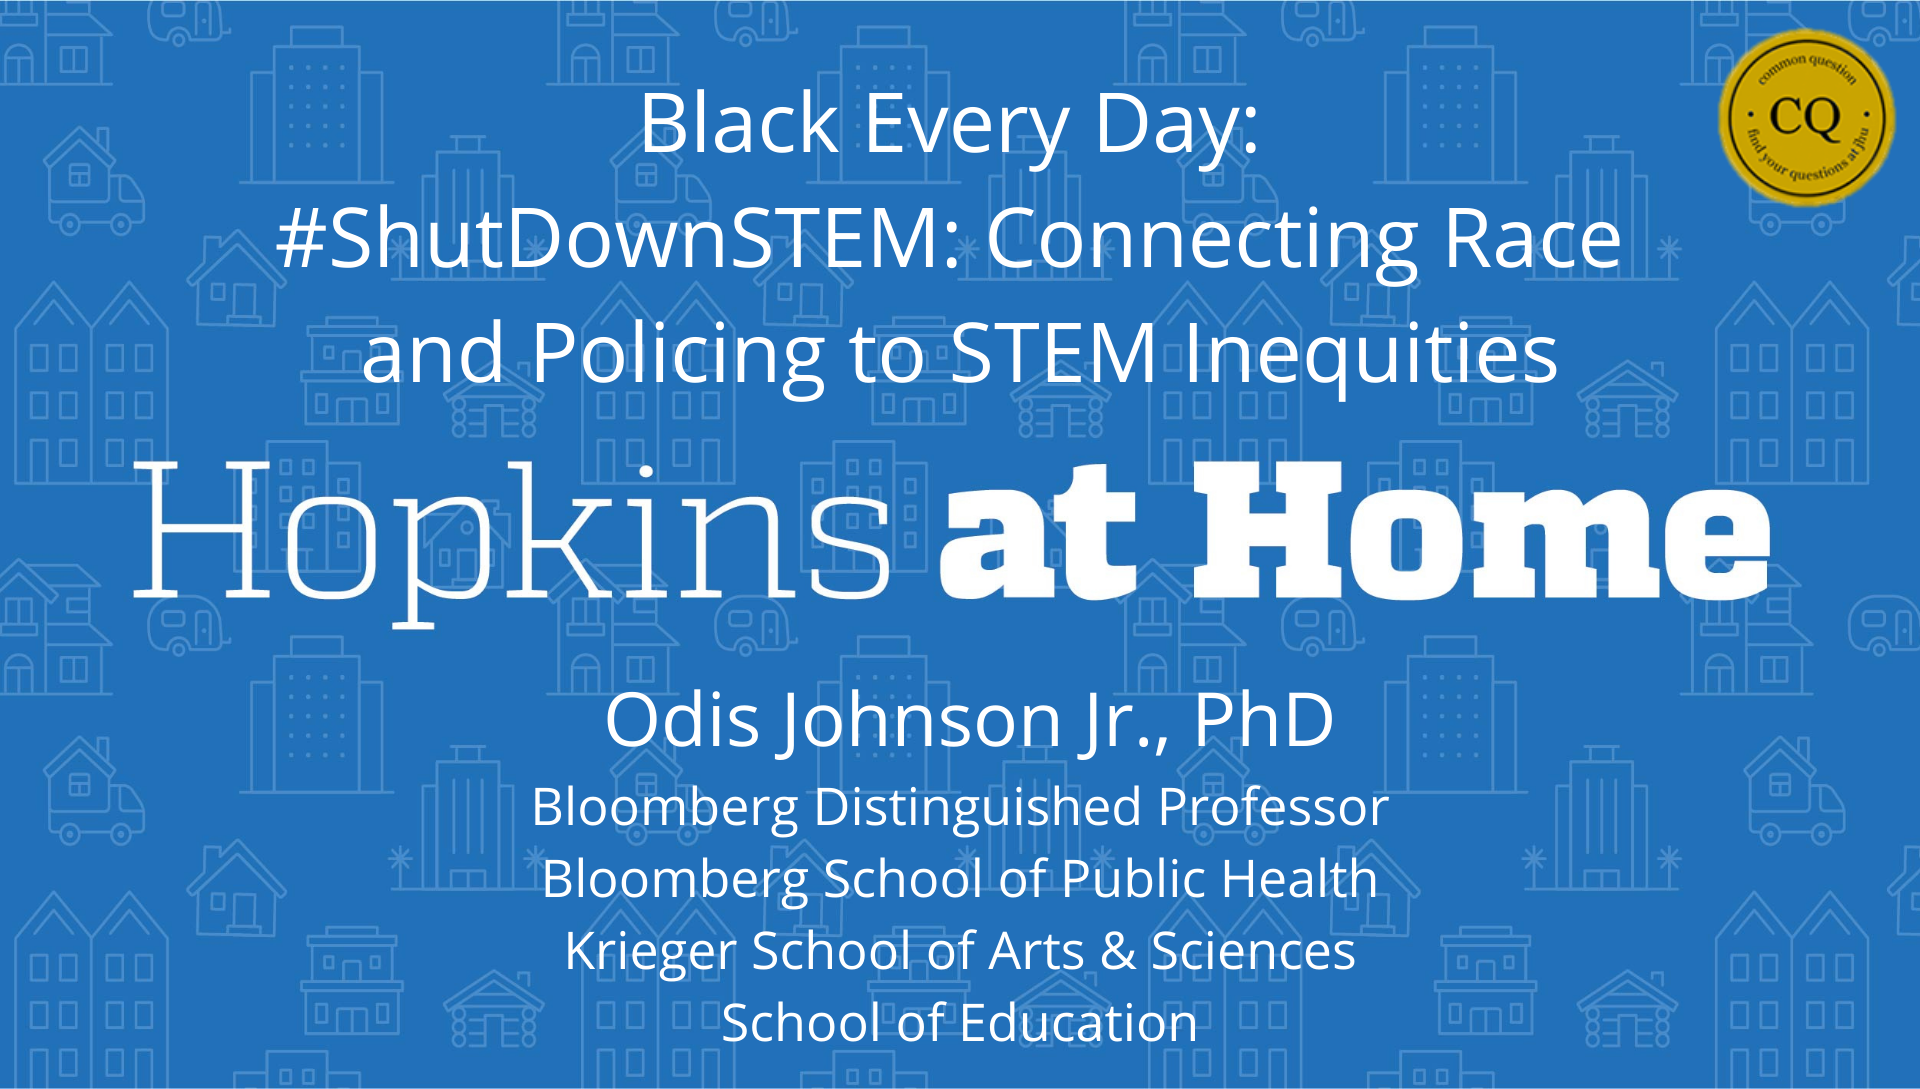 Black Every Day: #ShutDownSTEM: Connecting Race and Policing to STEM Inequities